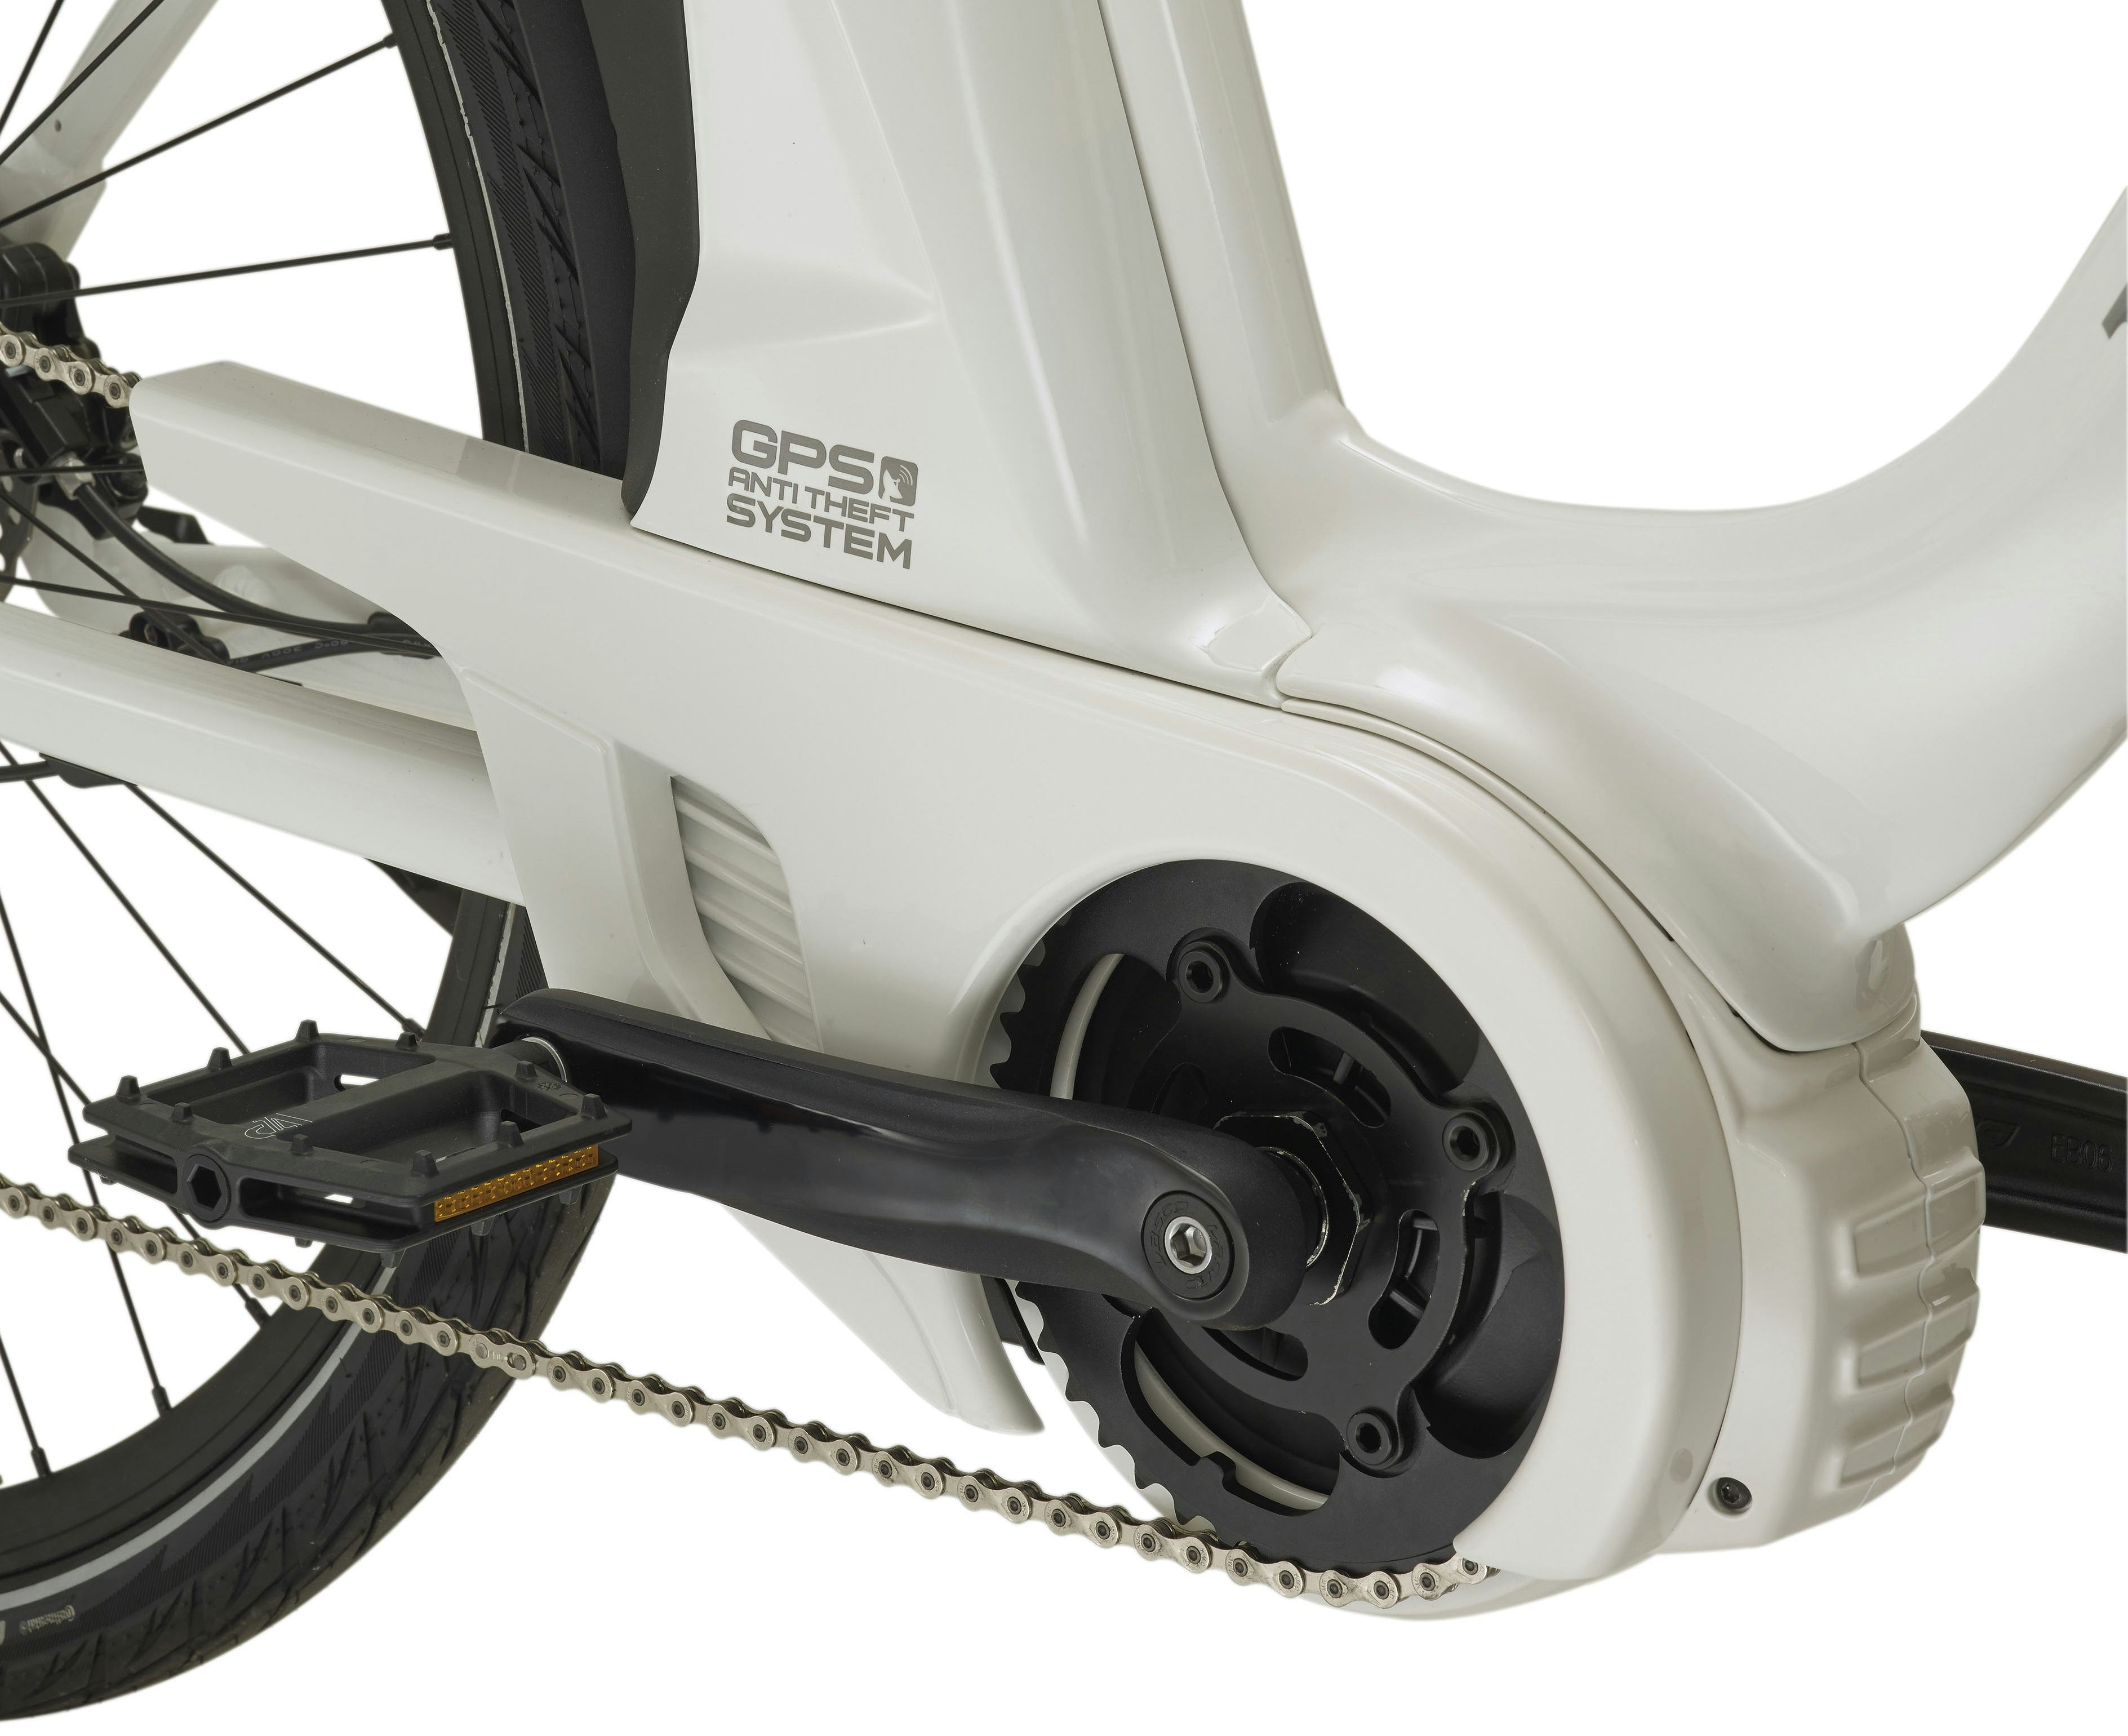 The Piaggio Wi-Bike features a compact motor that fits elegantly in the frame. – Photo Piaggio